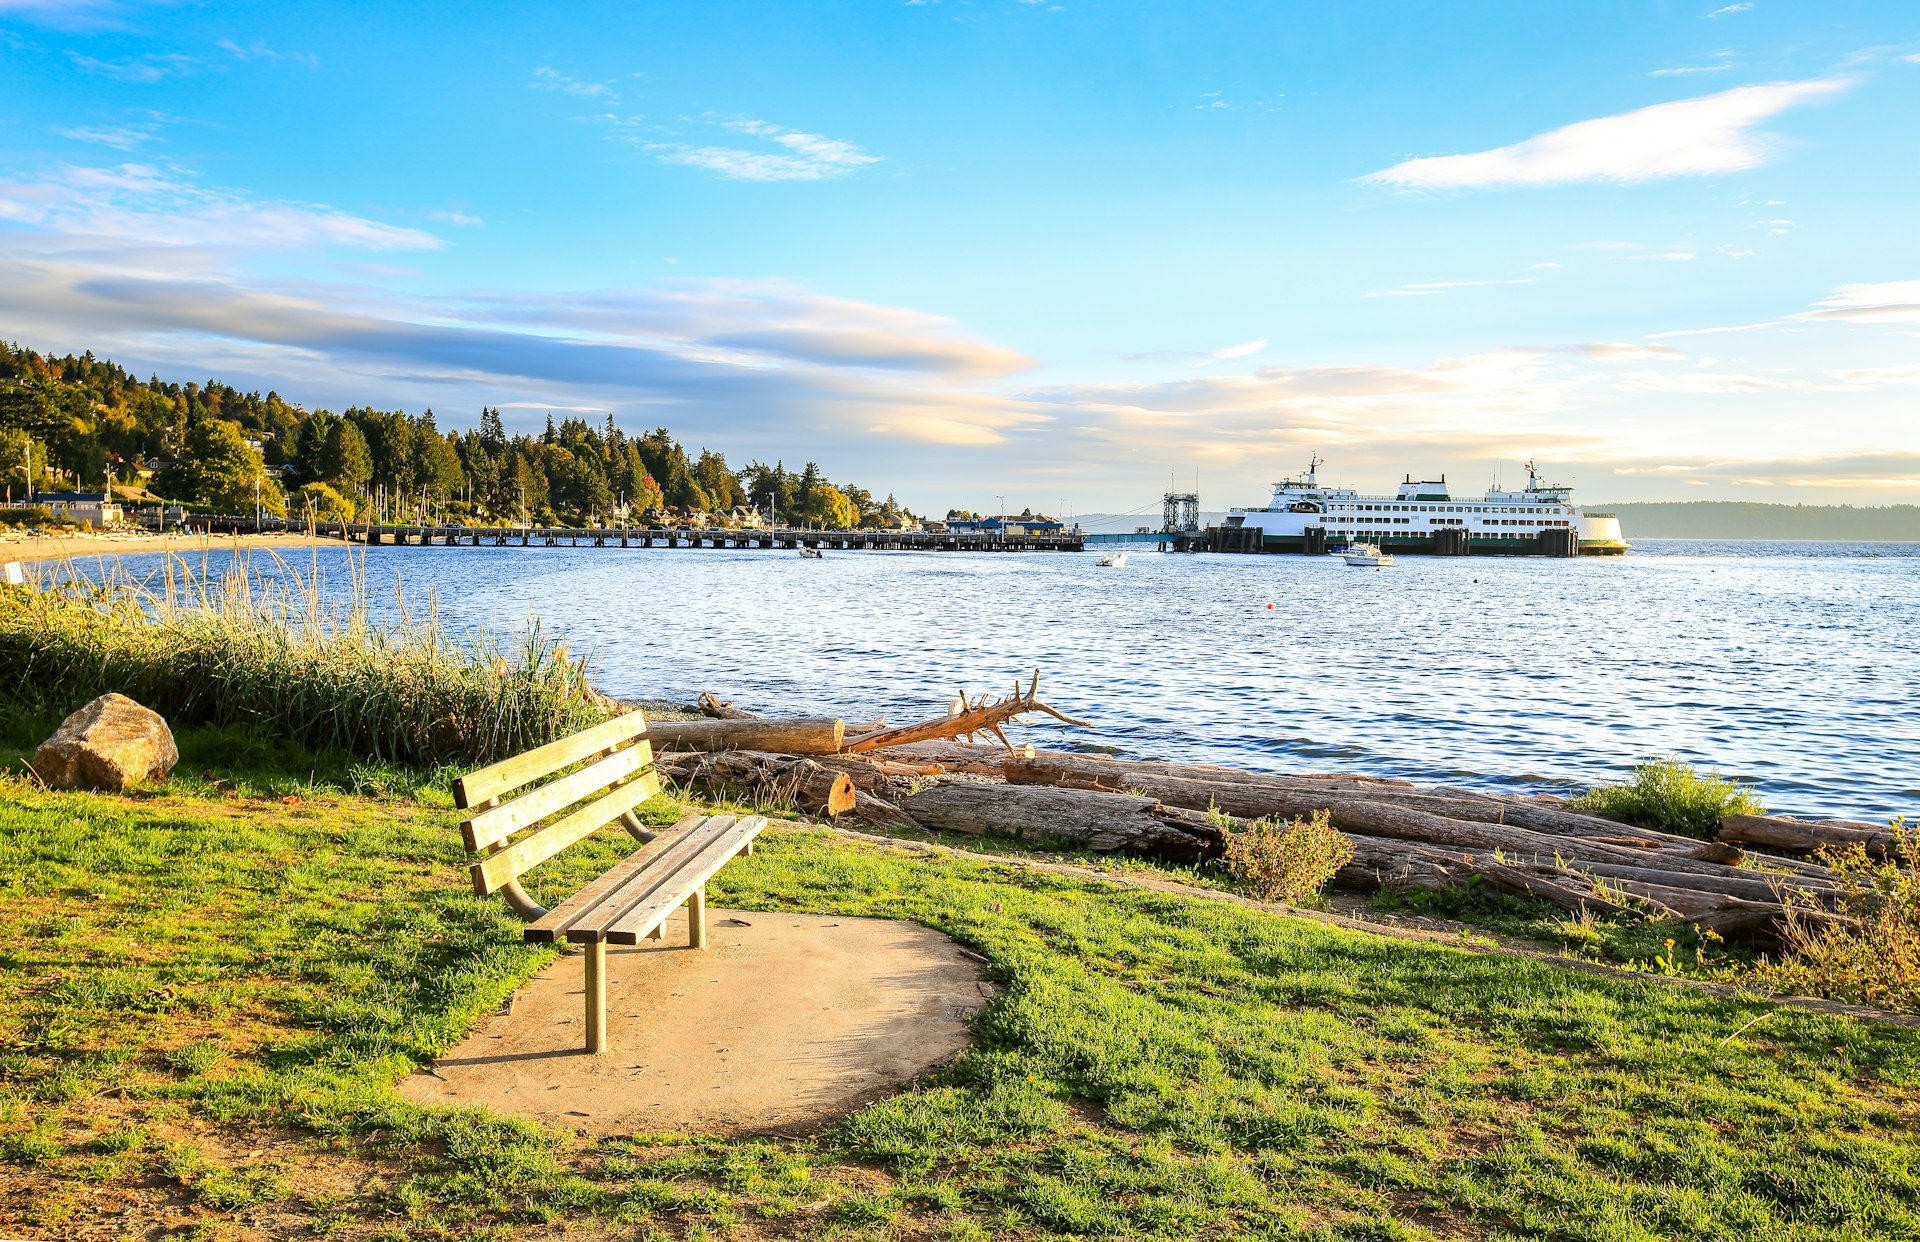 The beach with a ferry in the distance, Lincoln Park, Seattle, Washington, USA